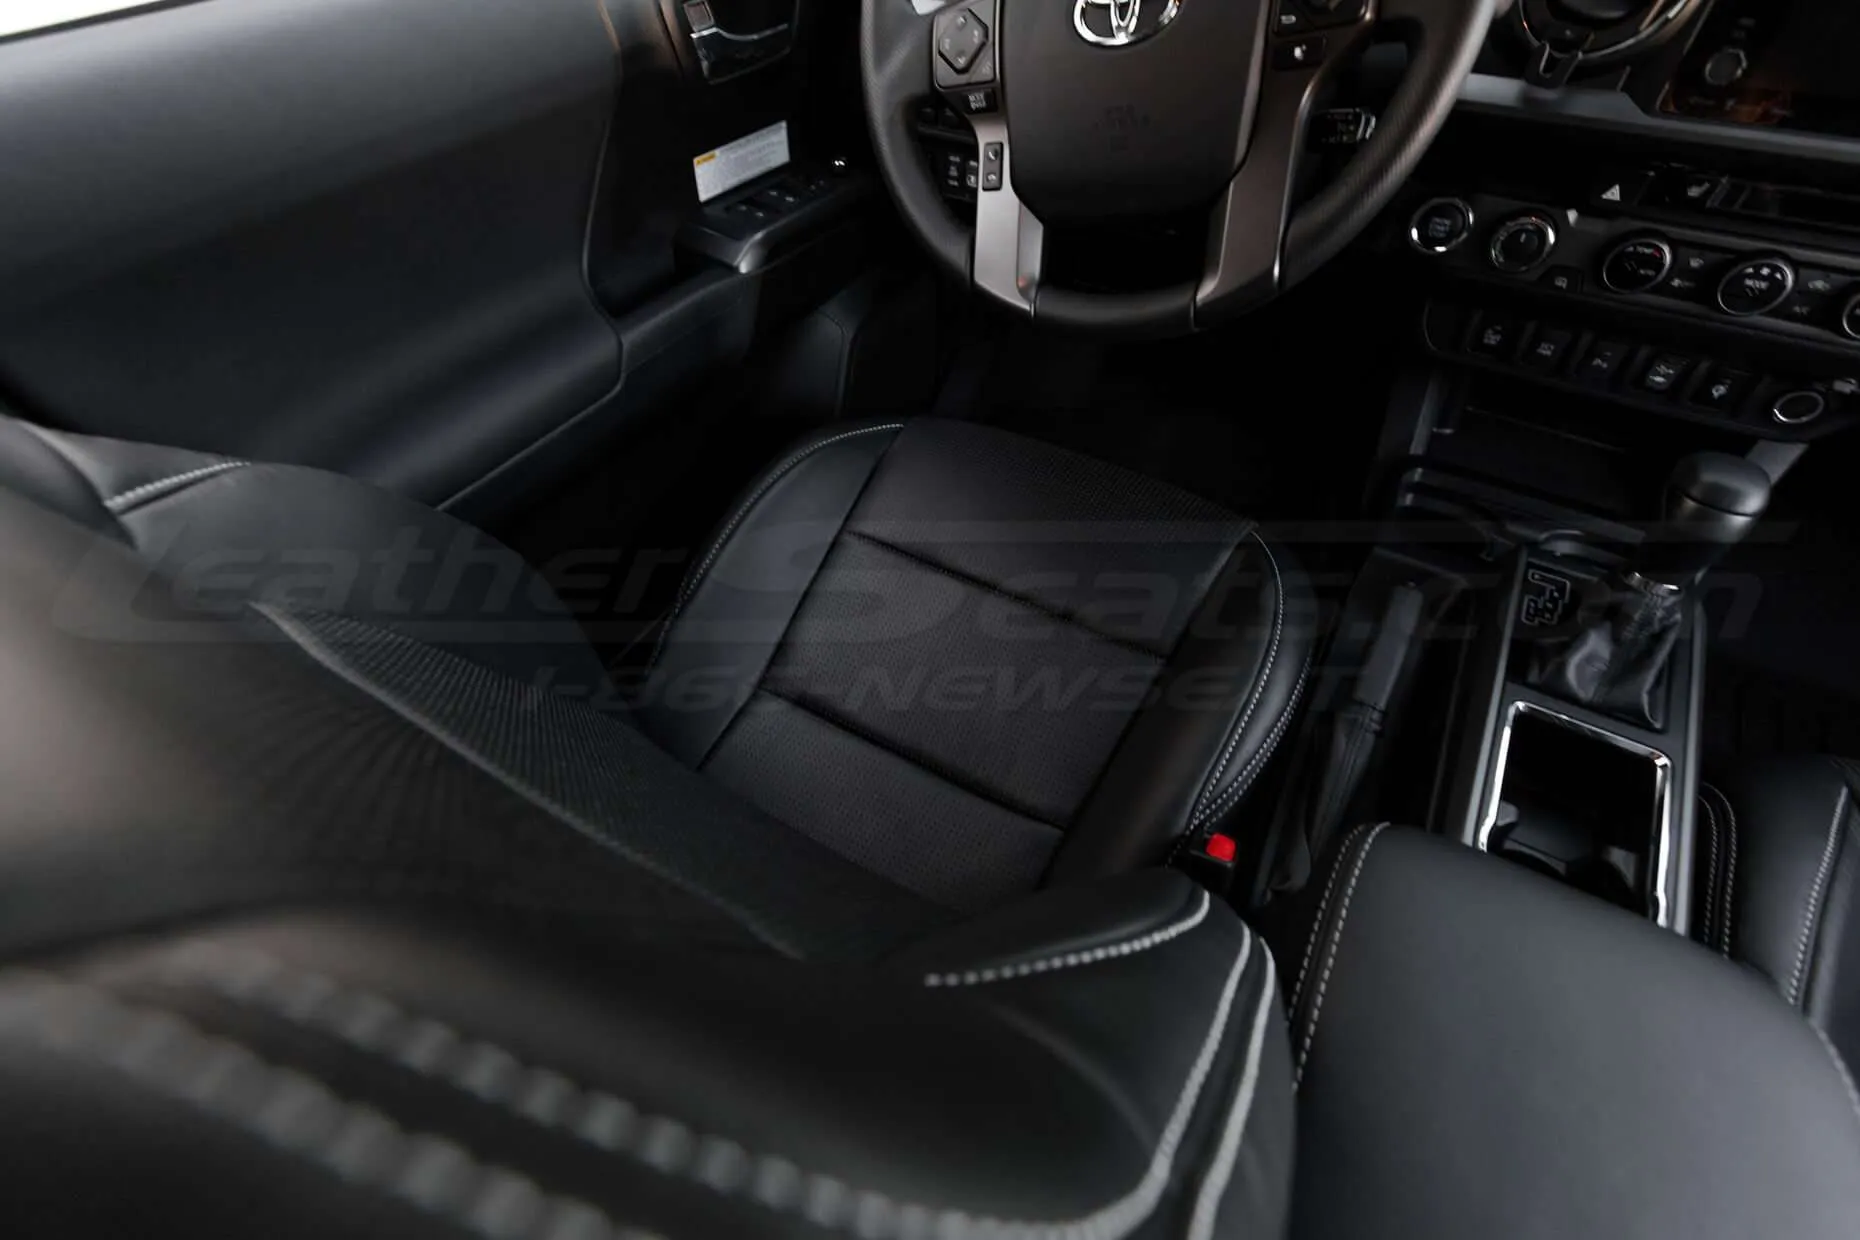 2016-2020 Toyota Tacoma Leather Seats - Black - Installed - Front backrest and seat cushion